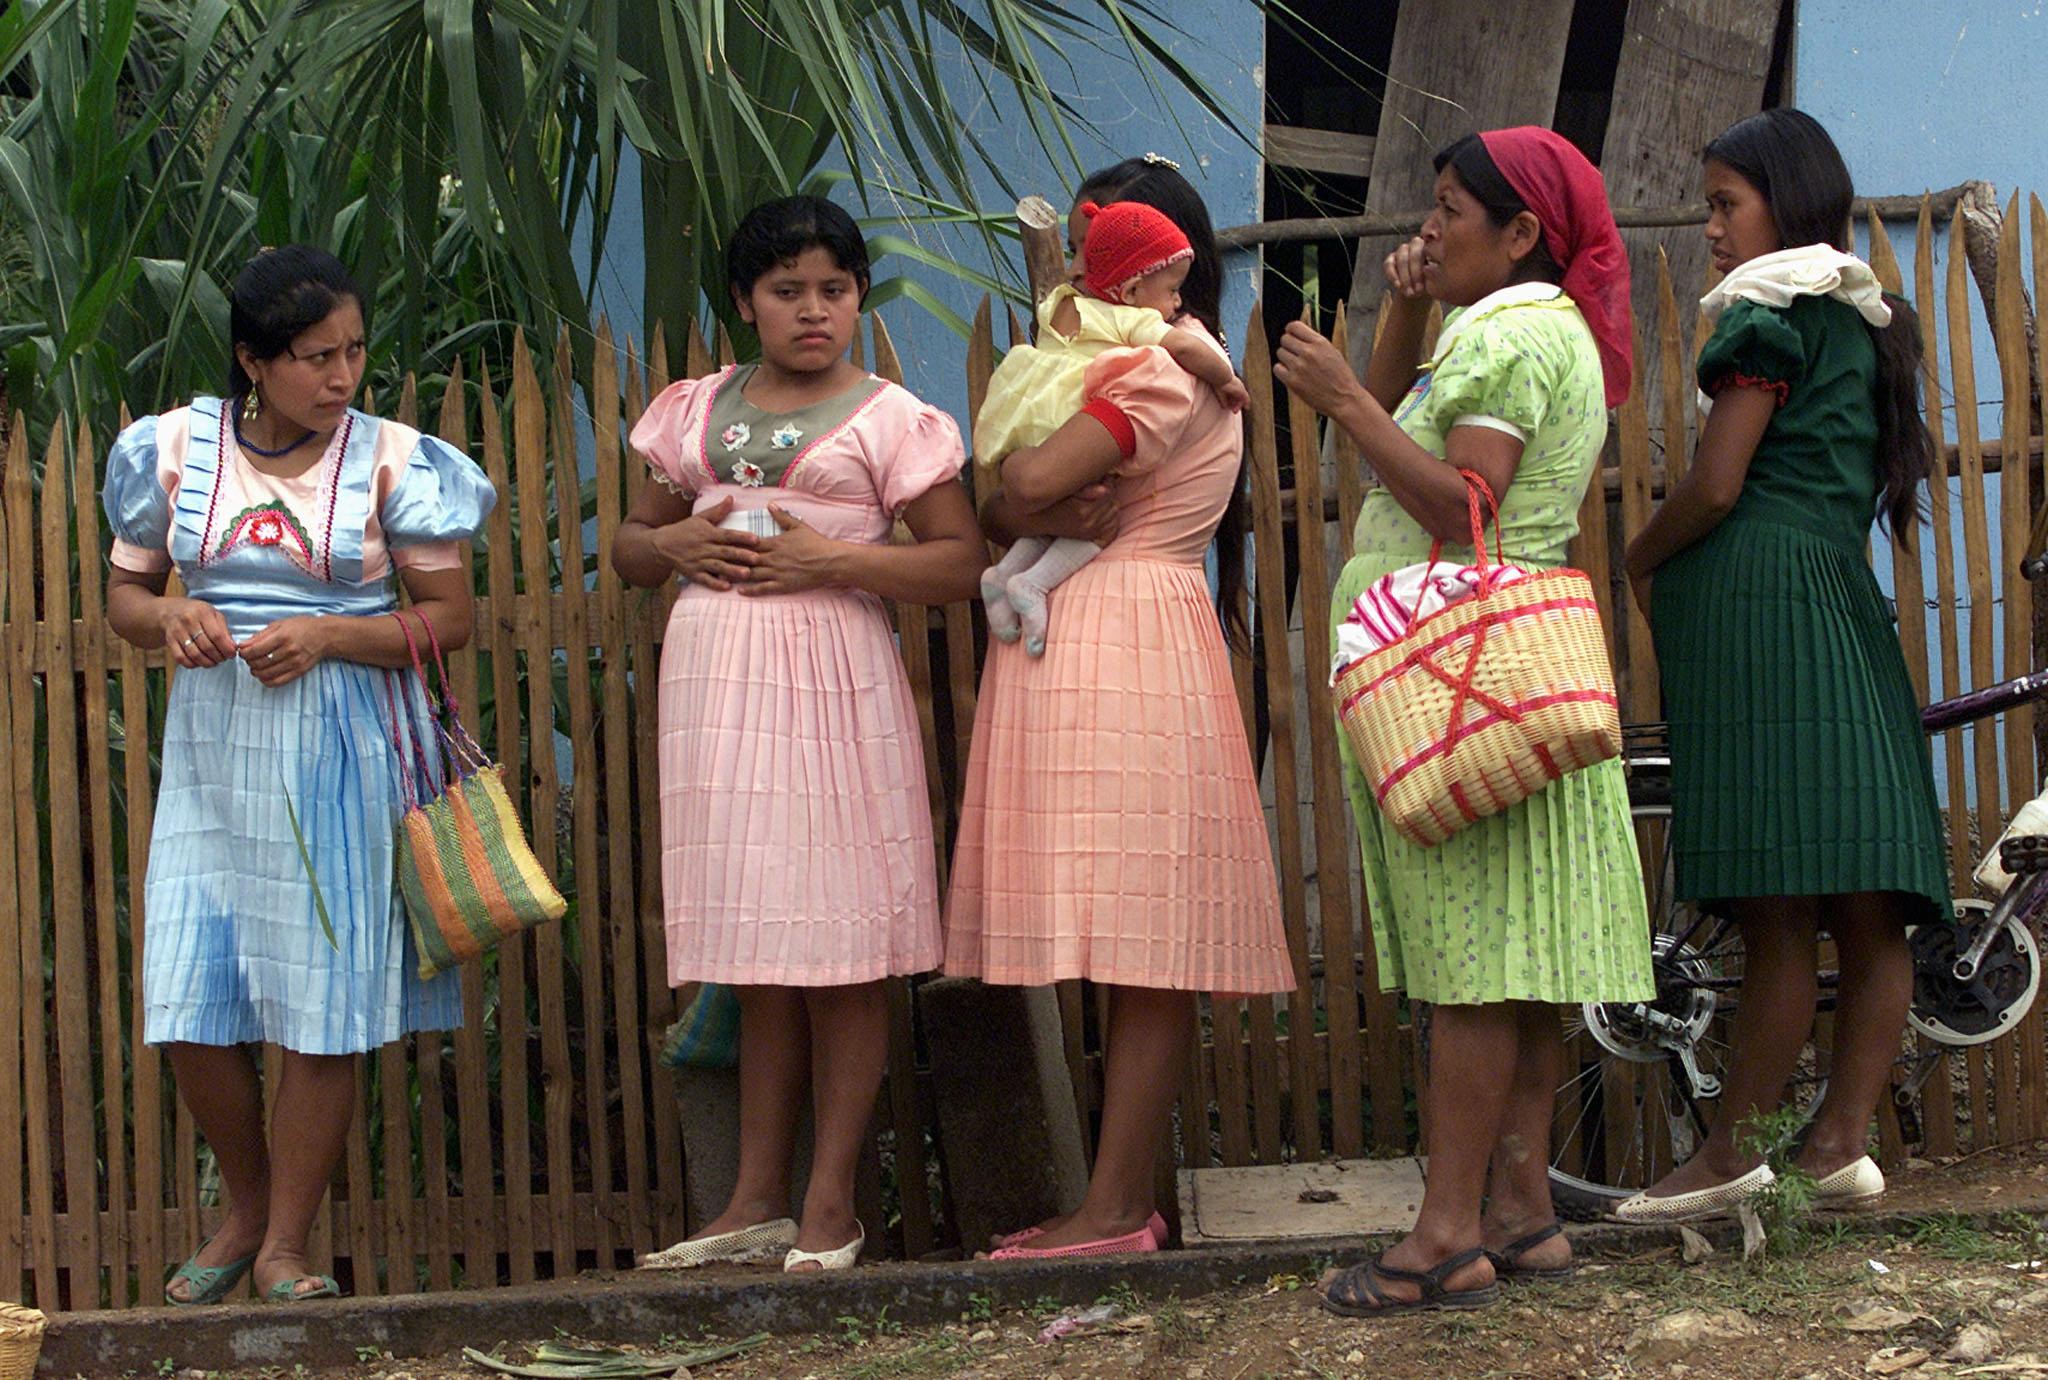 Guatemalan pregnant women line up to receive medical aid.